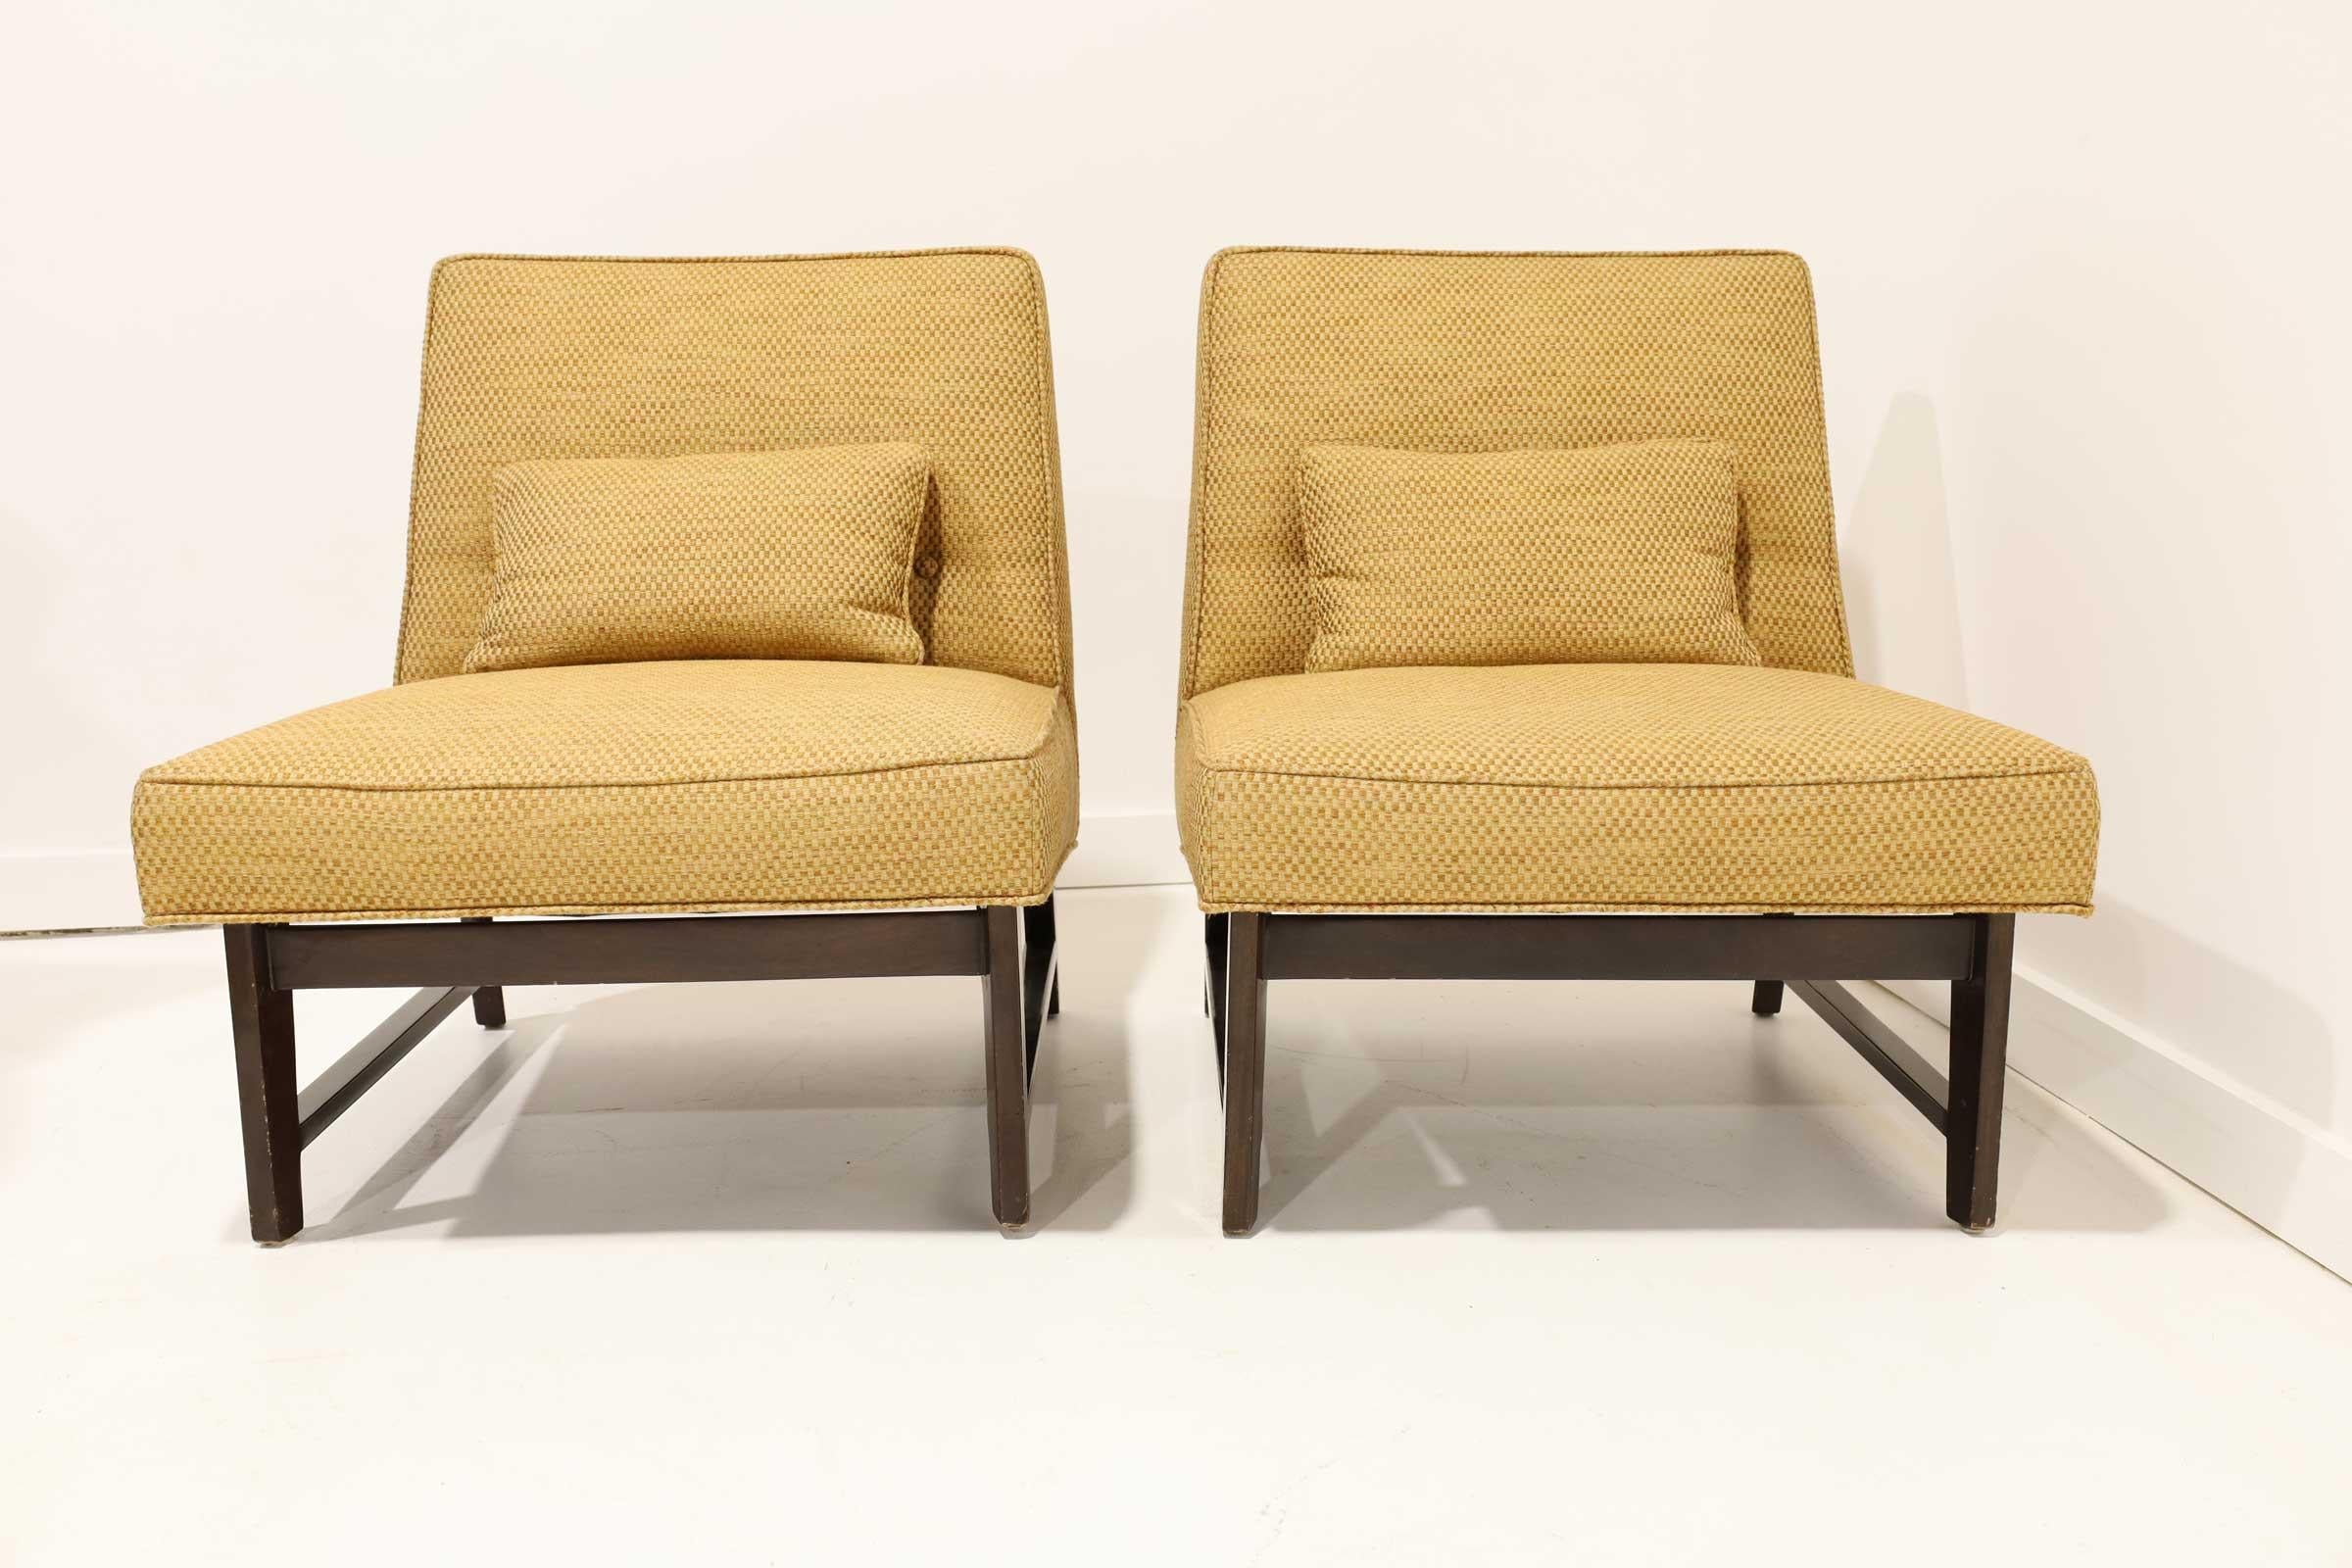 An elegant Classic design. These chairs are upholstered in a linen or silk tight weave. The kidney pillows included.